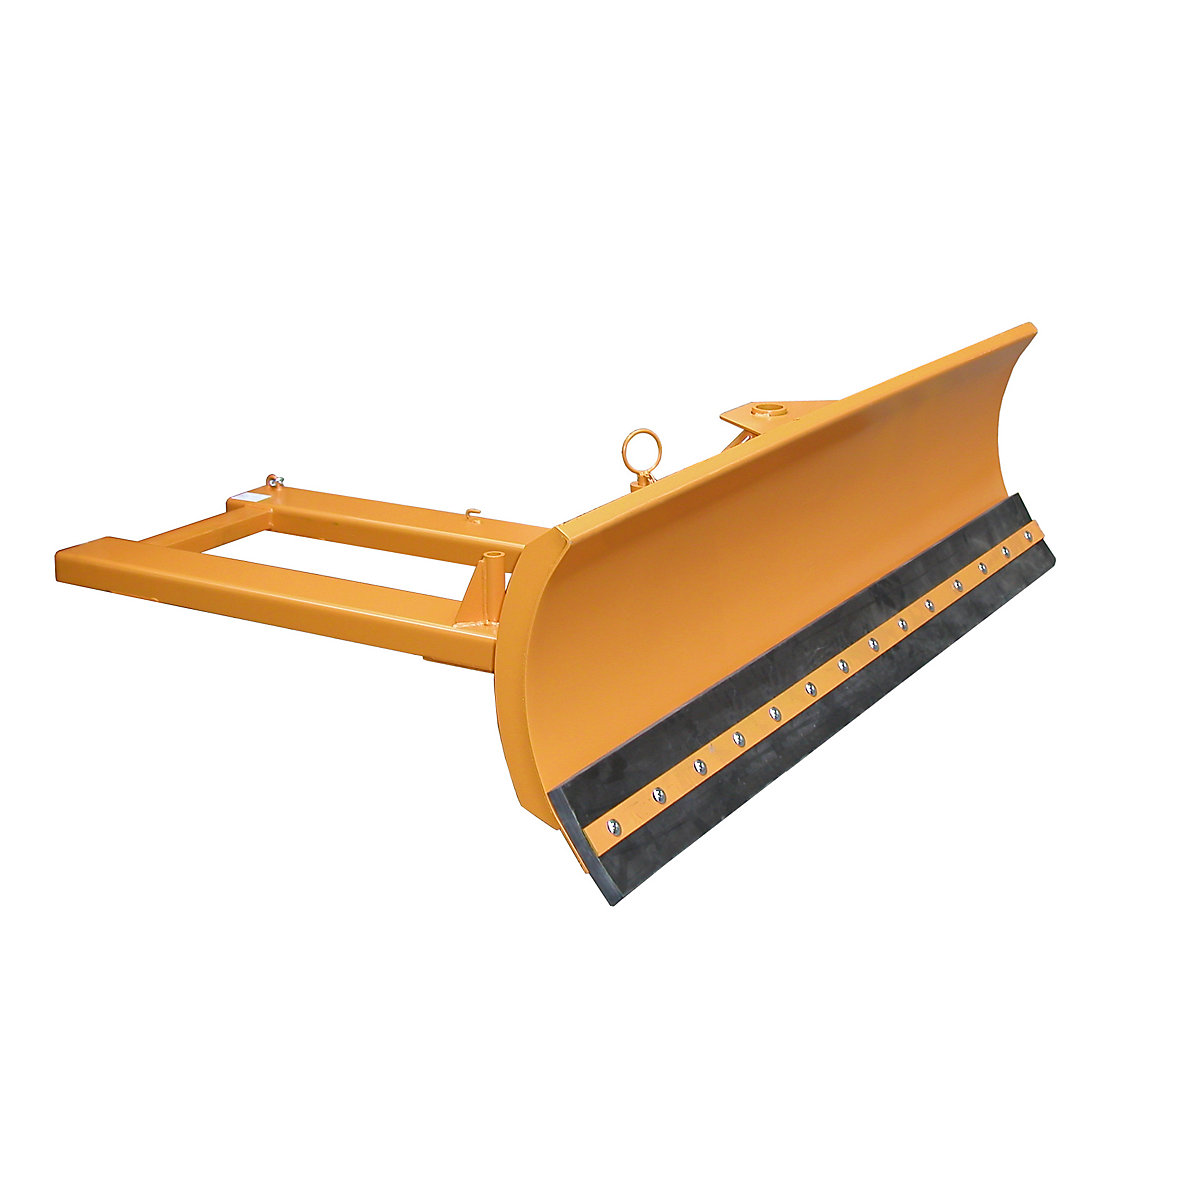 Snow plough for forklifts – eurokraft pro, rubber scraping edge, blade width 2100 mm